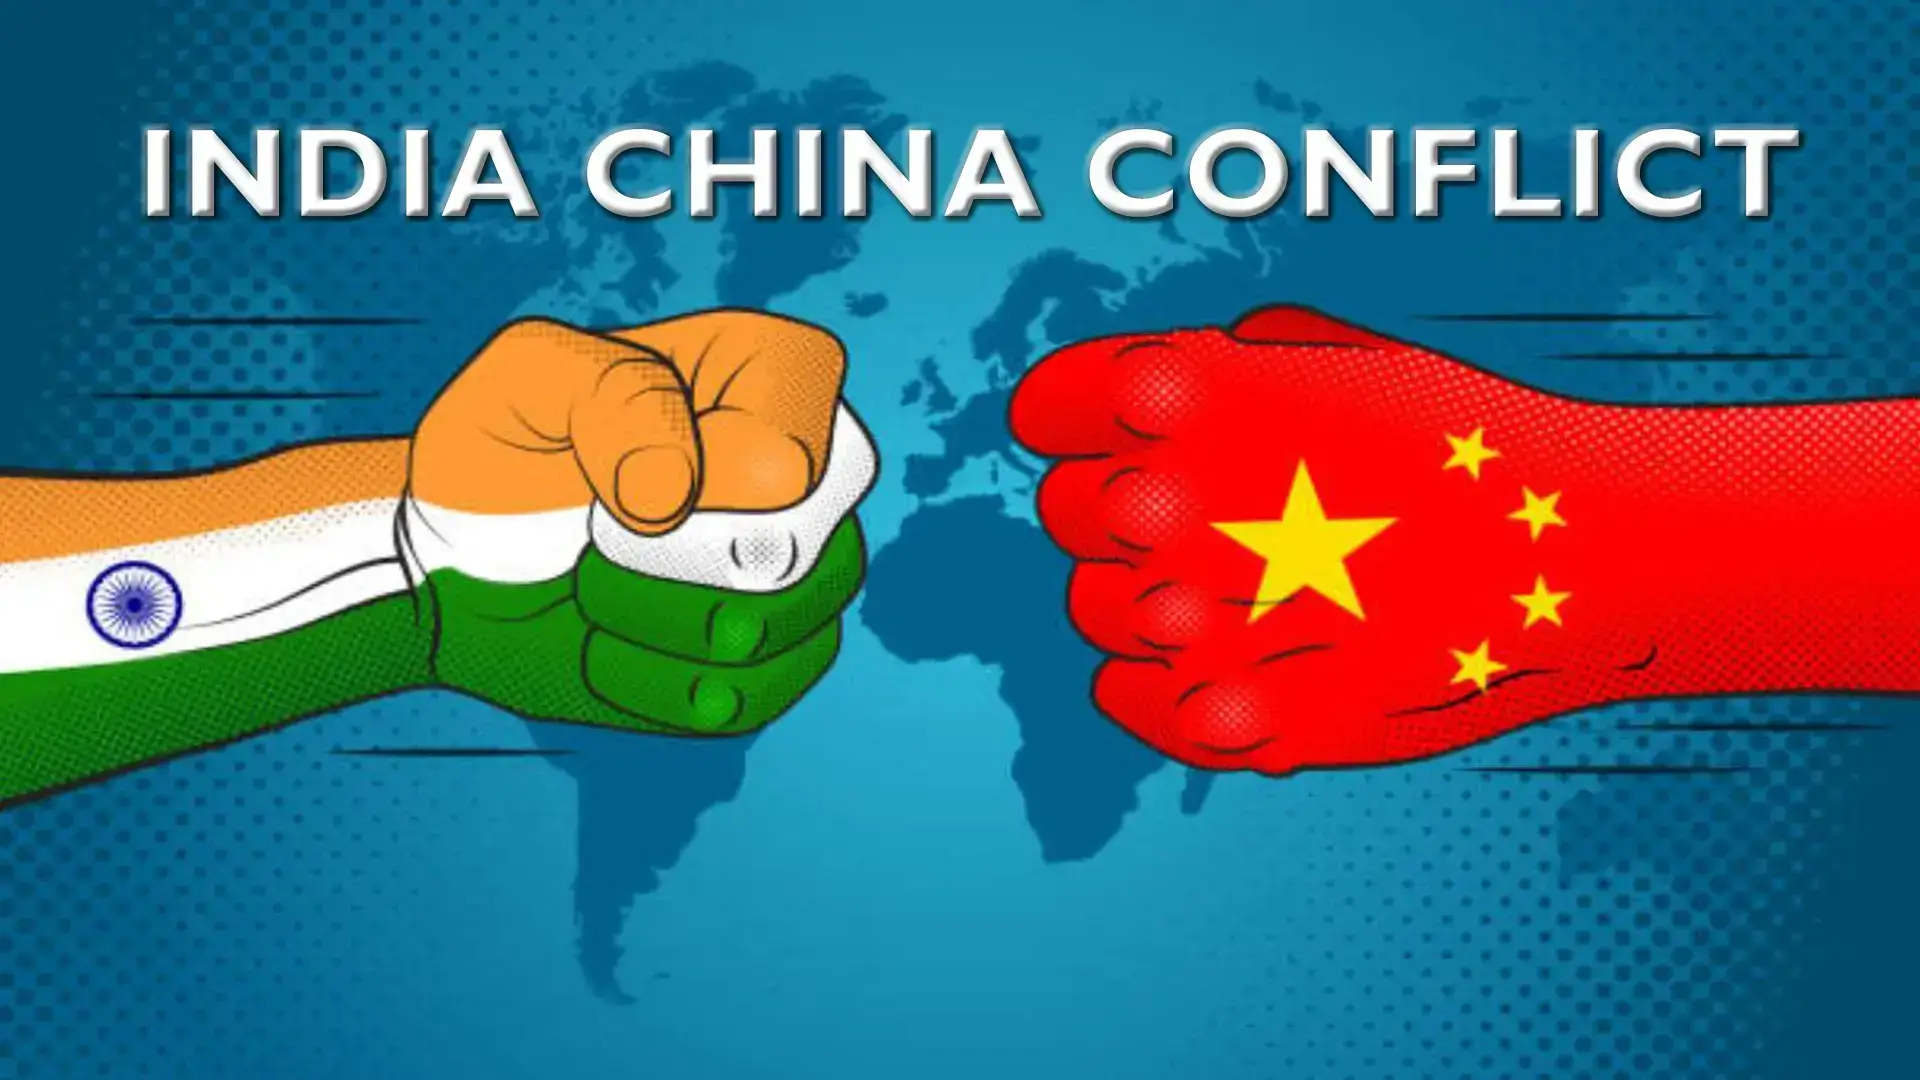 India China Conflict This Post Design By The Revolution Deshbhakt Hindustani